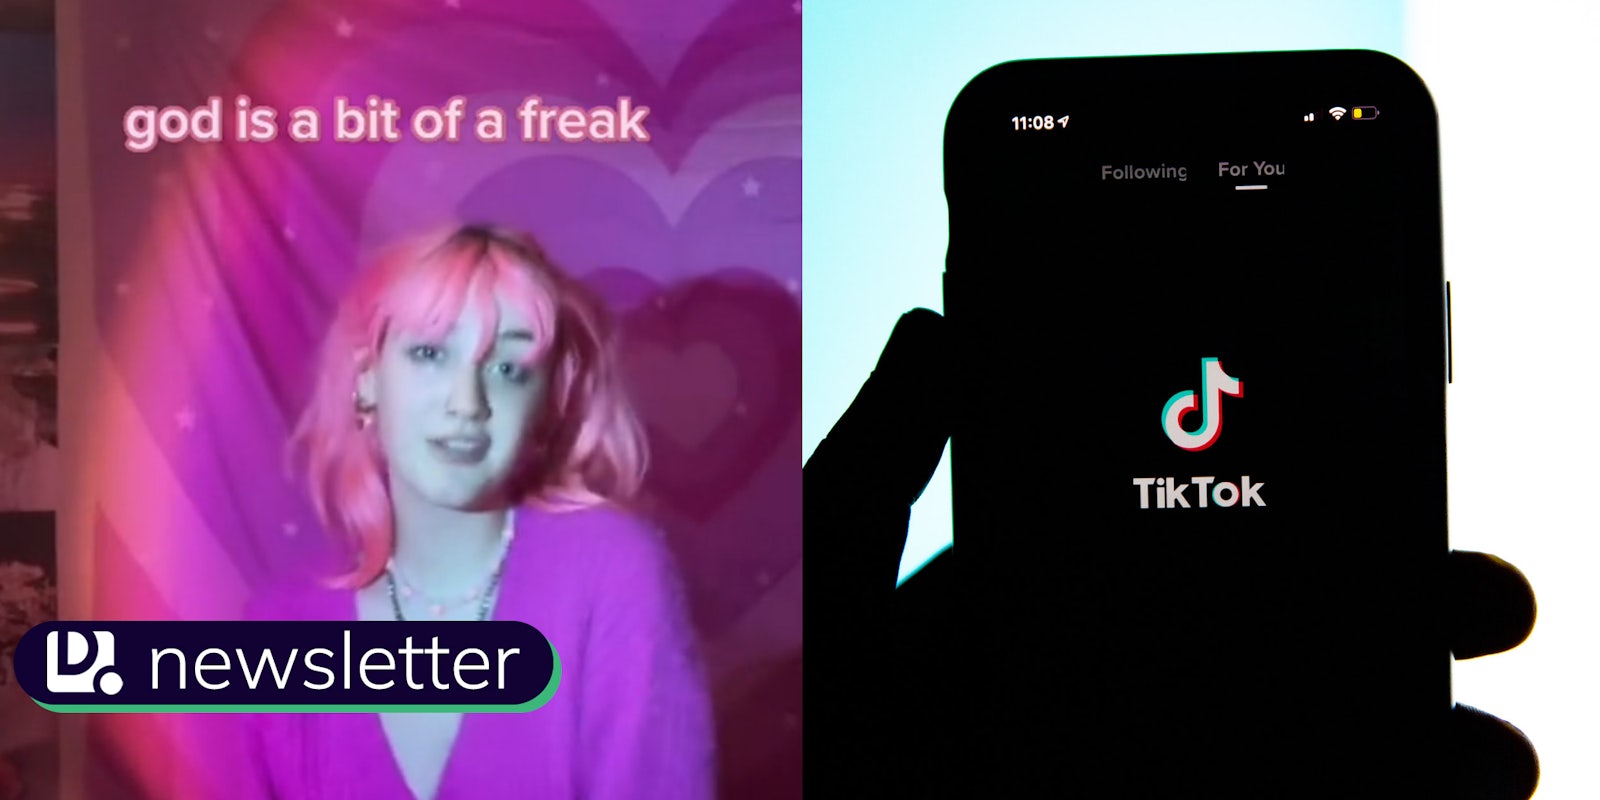 A side by side of a TikTok showing the text 'god is a bit of a freak' next to a photo of someone holding a phone with the TikTok logo on it. In the bottom left corner is the Daily Dot newsletter logo.